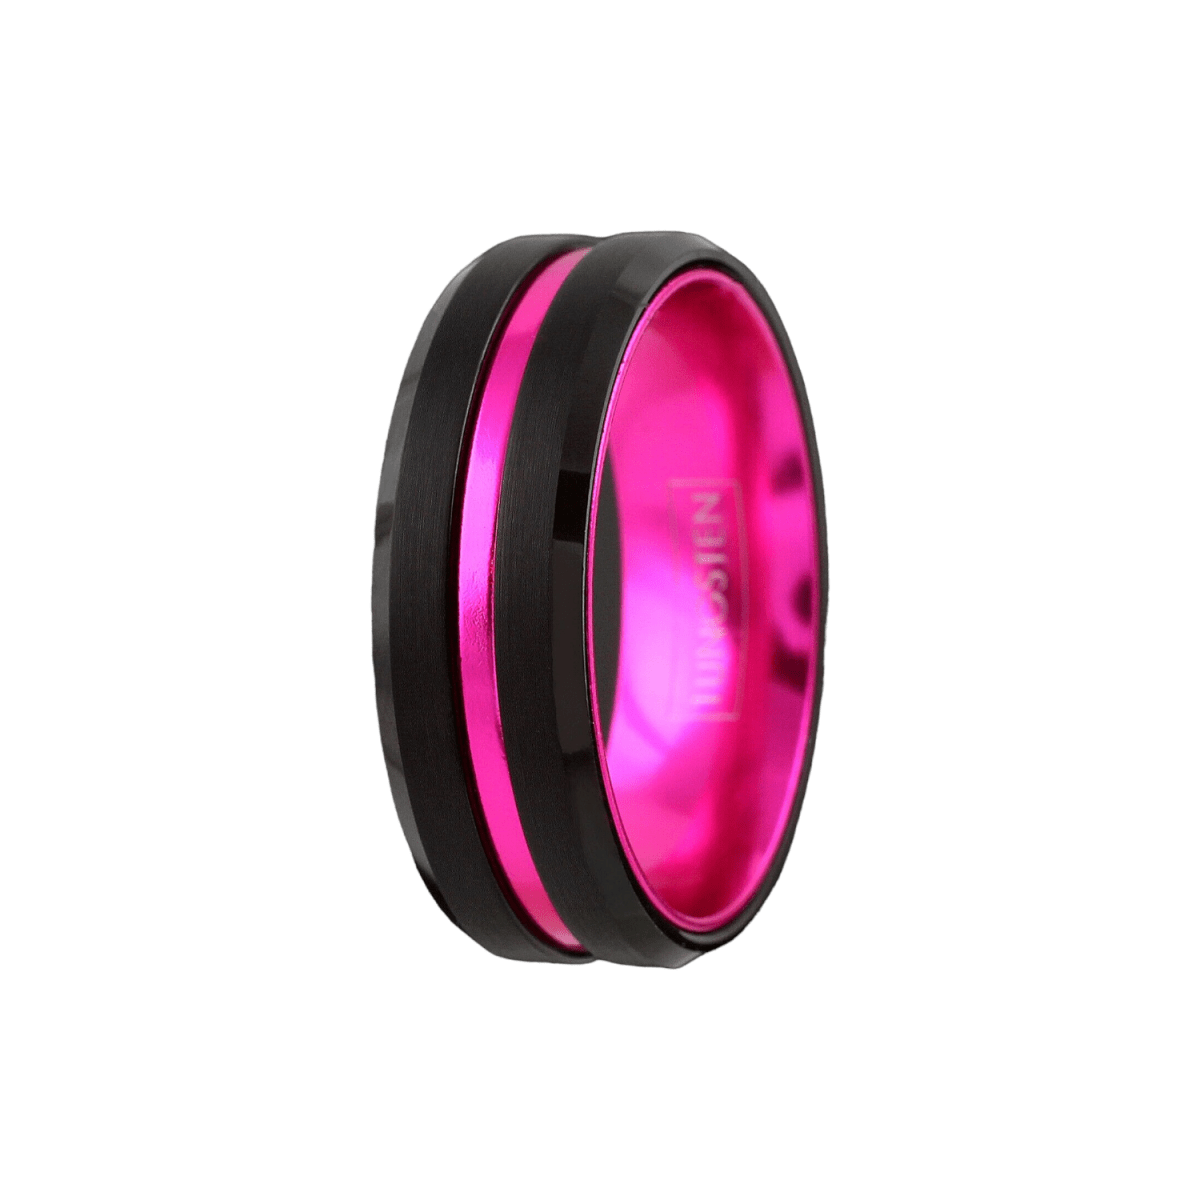 Pink and black tungsten wedding band with beveled edges